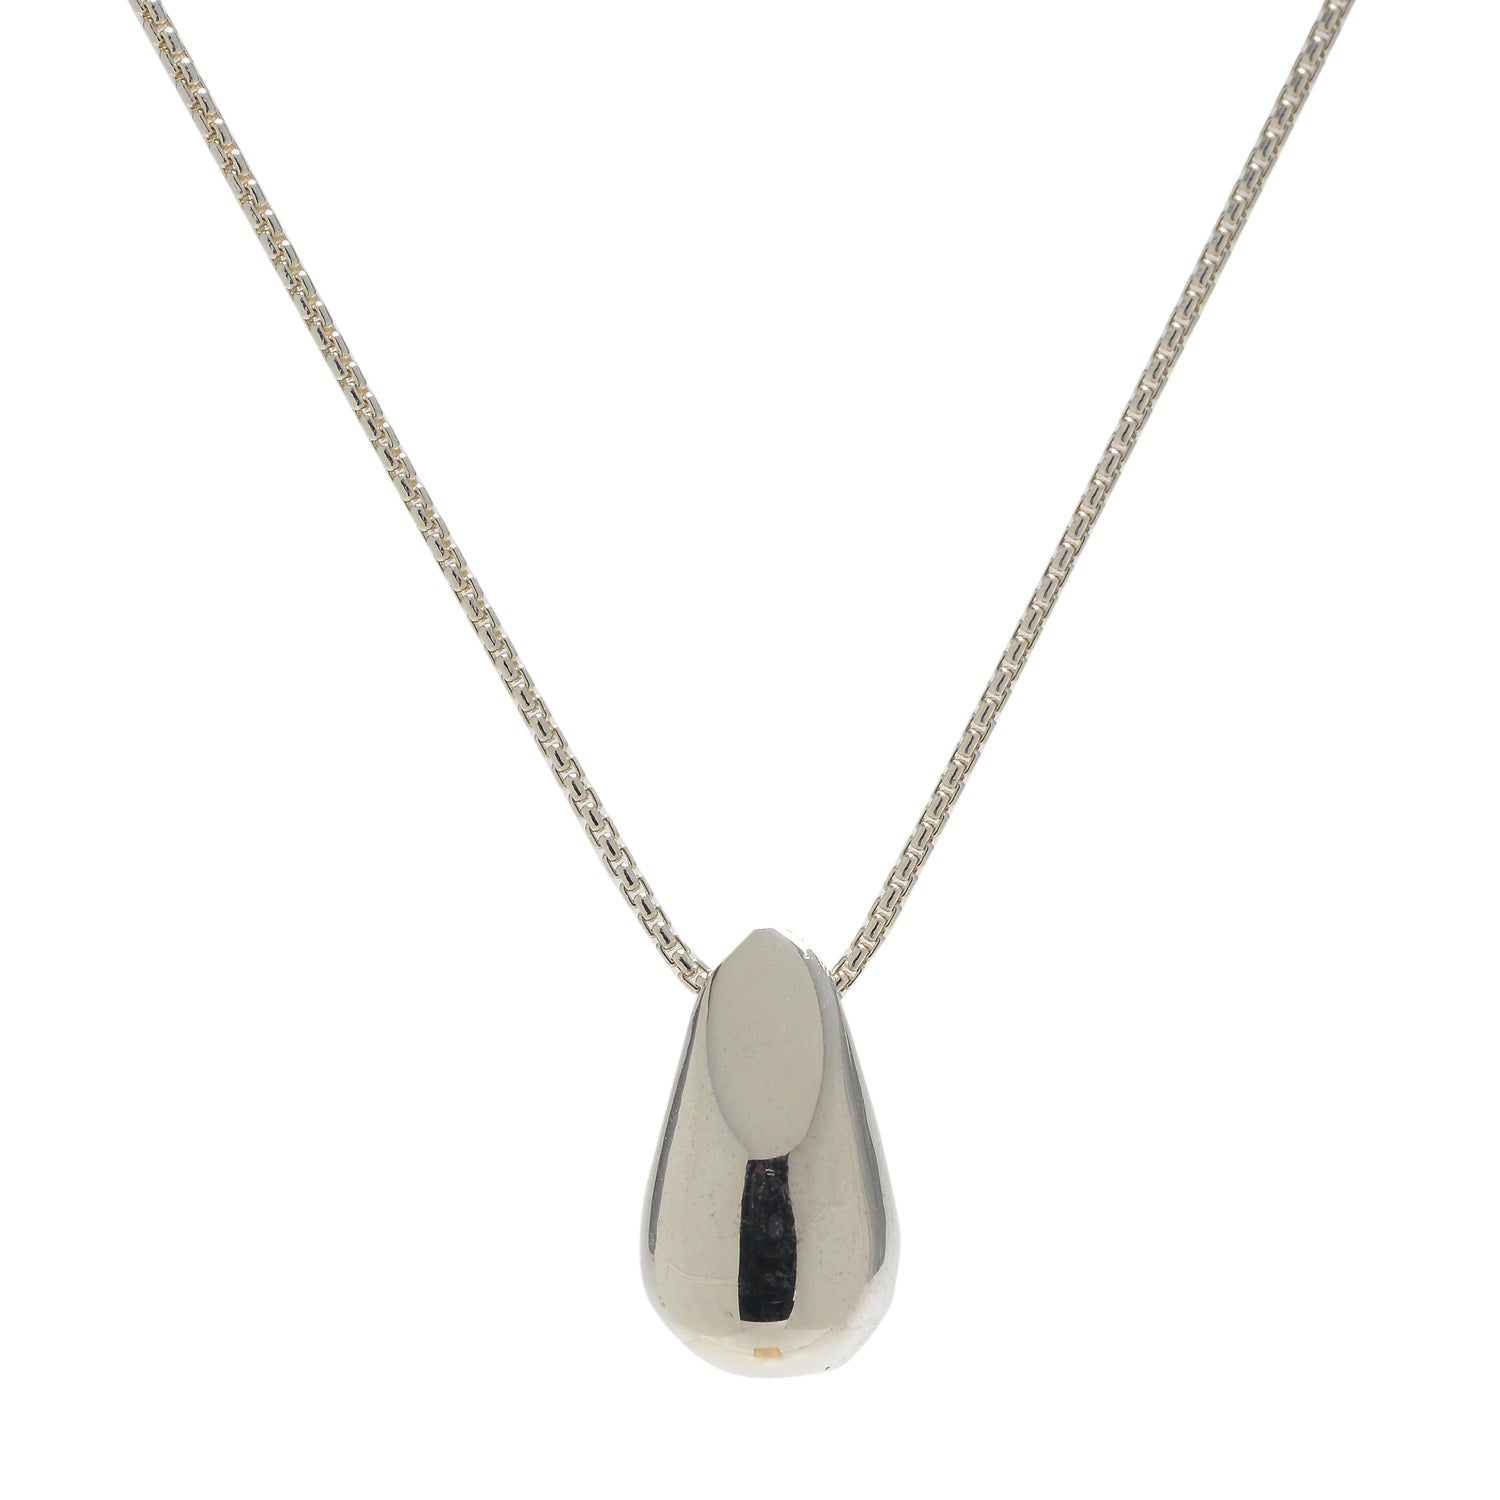 Modernist Necklace - Petit - Bing Bang Jewelry NYC